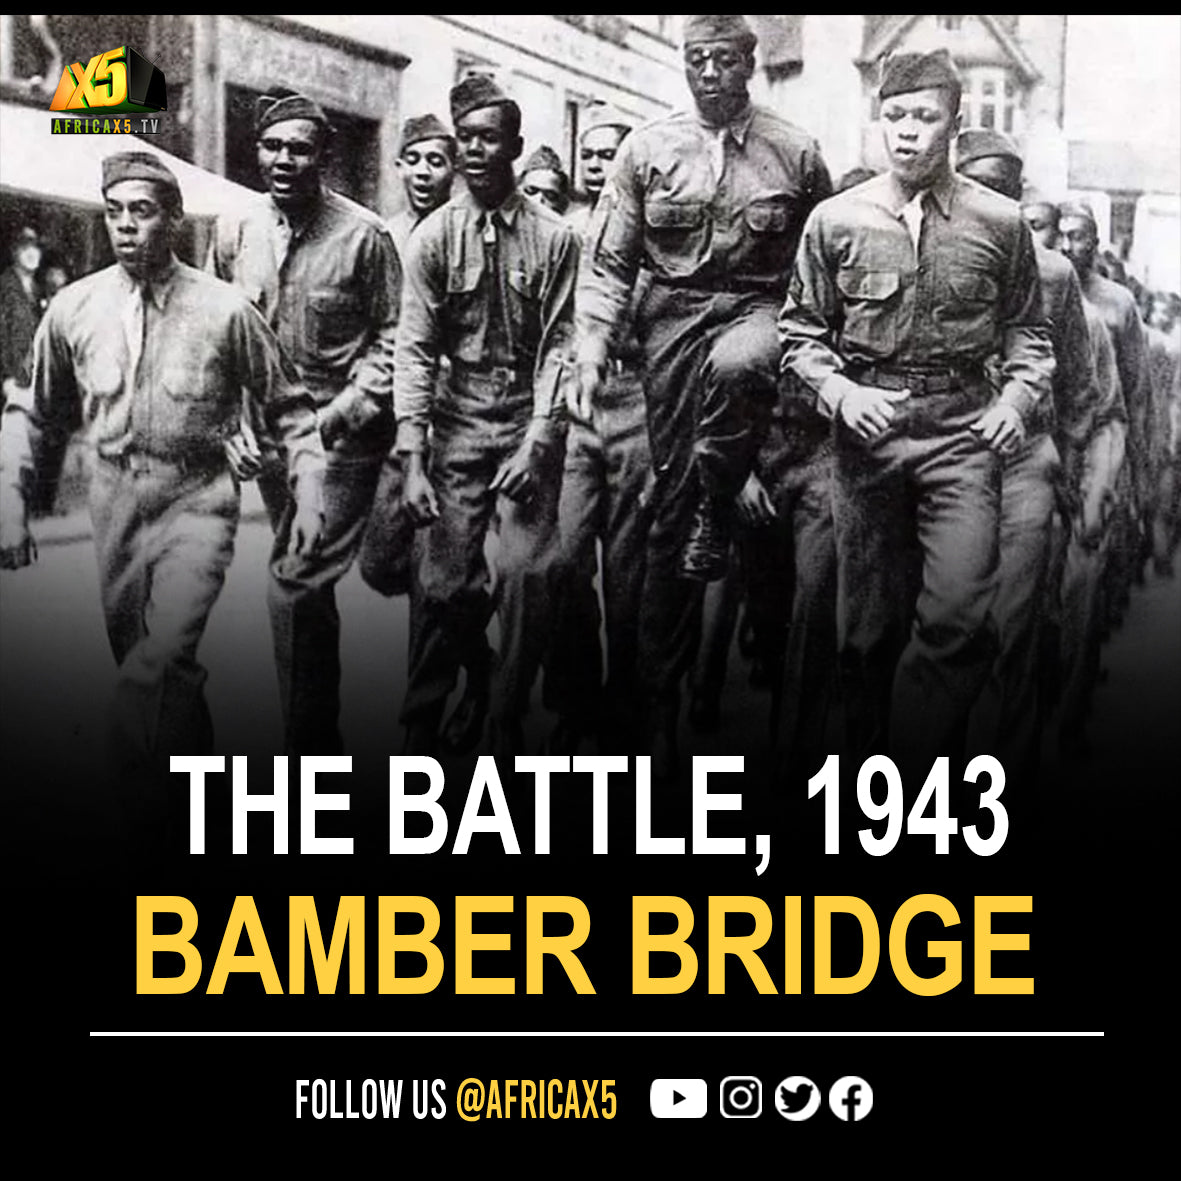 The Battle of Bamber Bridge, 1943.  Racist US military police attacked black US troops on British soil.